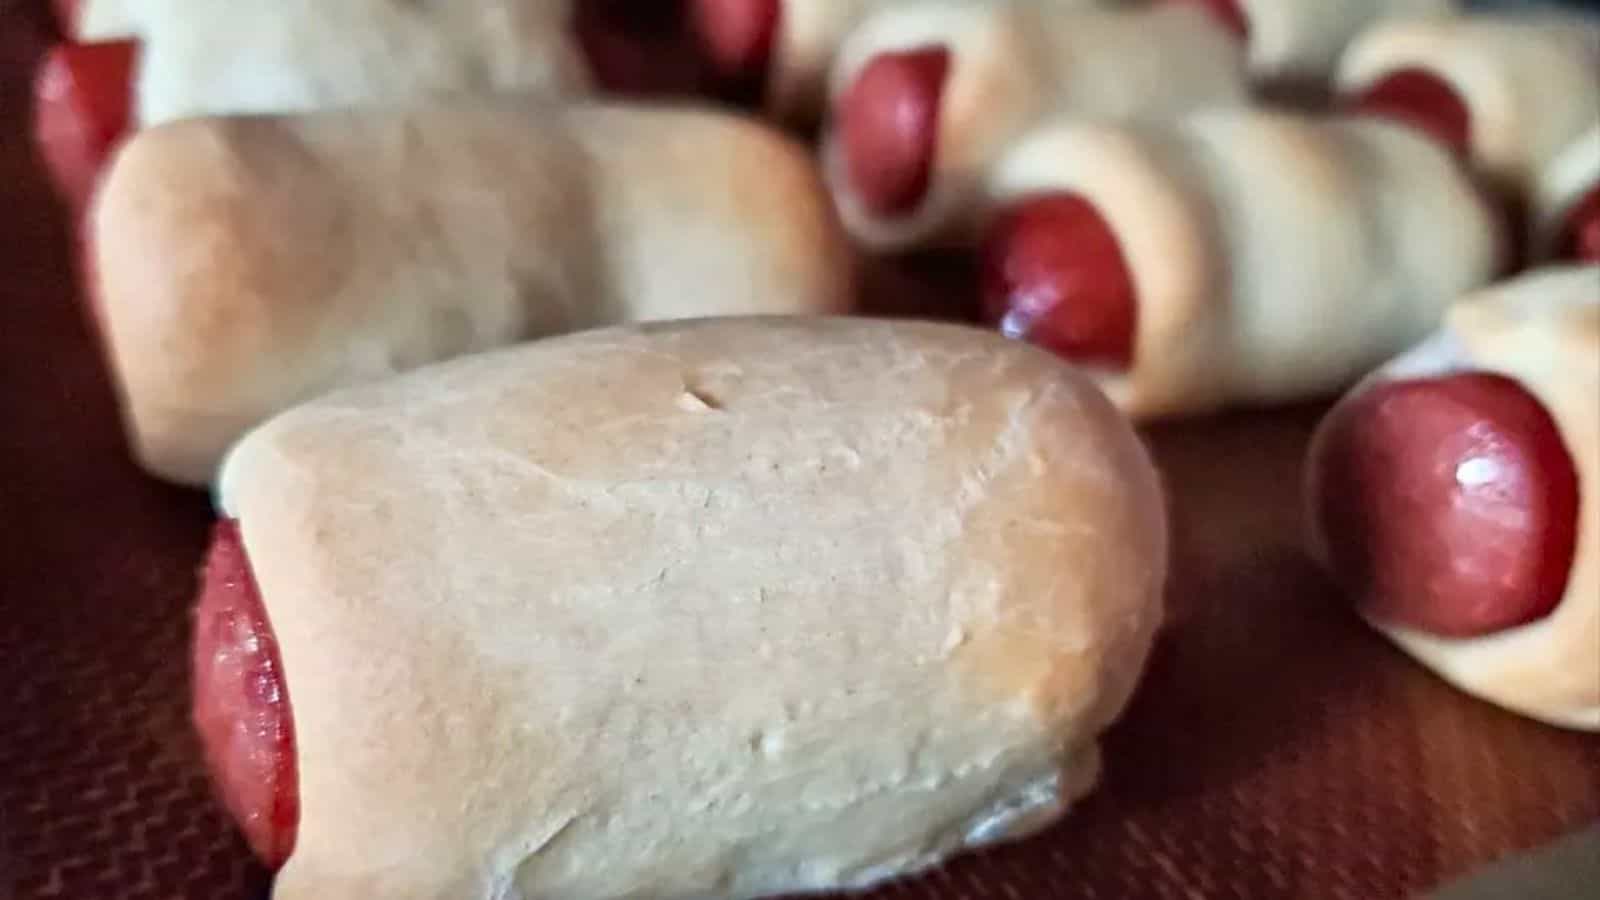 Image shows Hot dogs wrapped in crescent roll dough on a baking sheet.